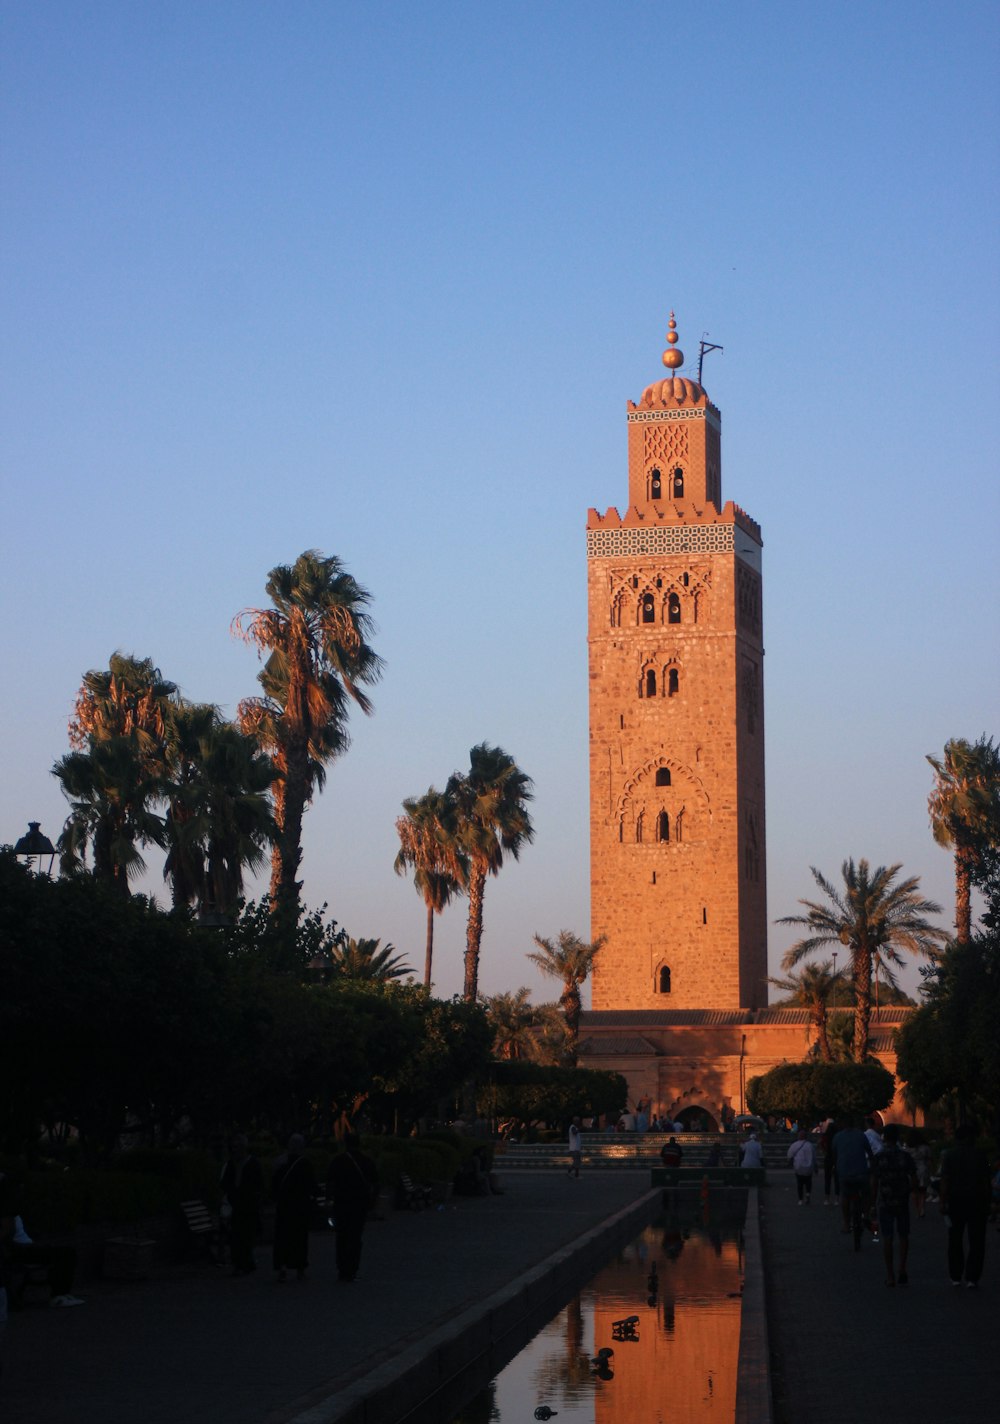 a tall tower with a clock with Koutoubia Mosque in the background